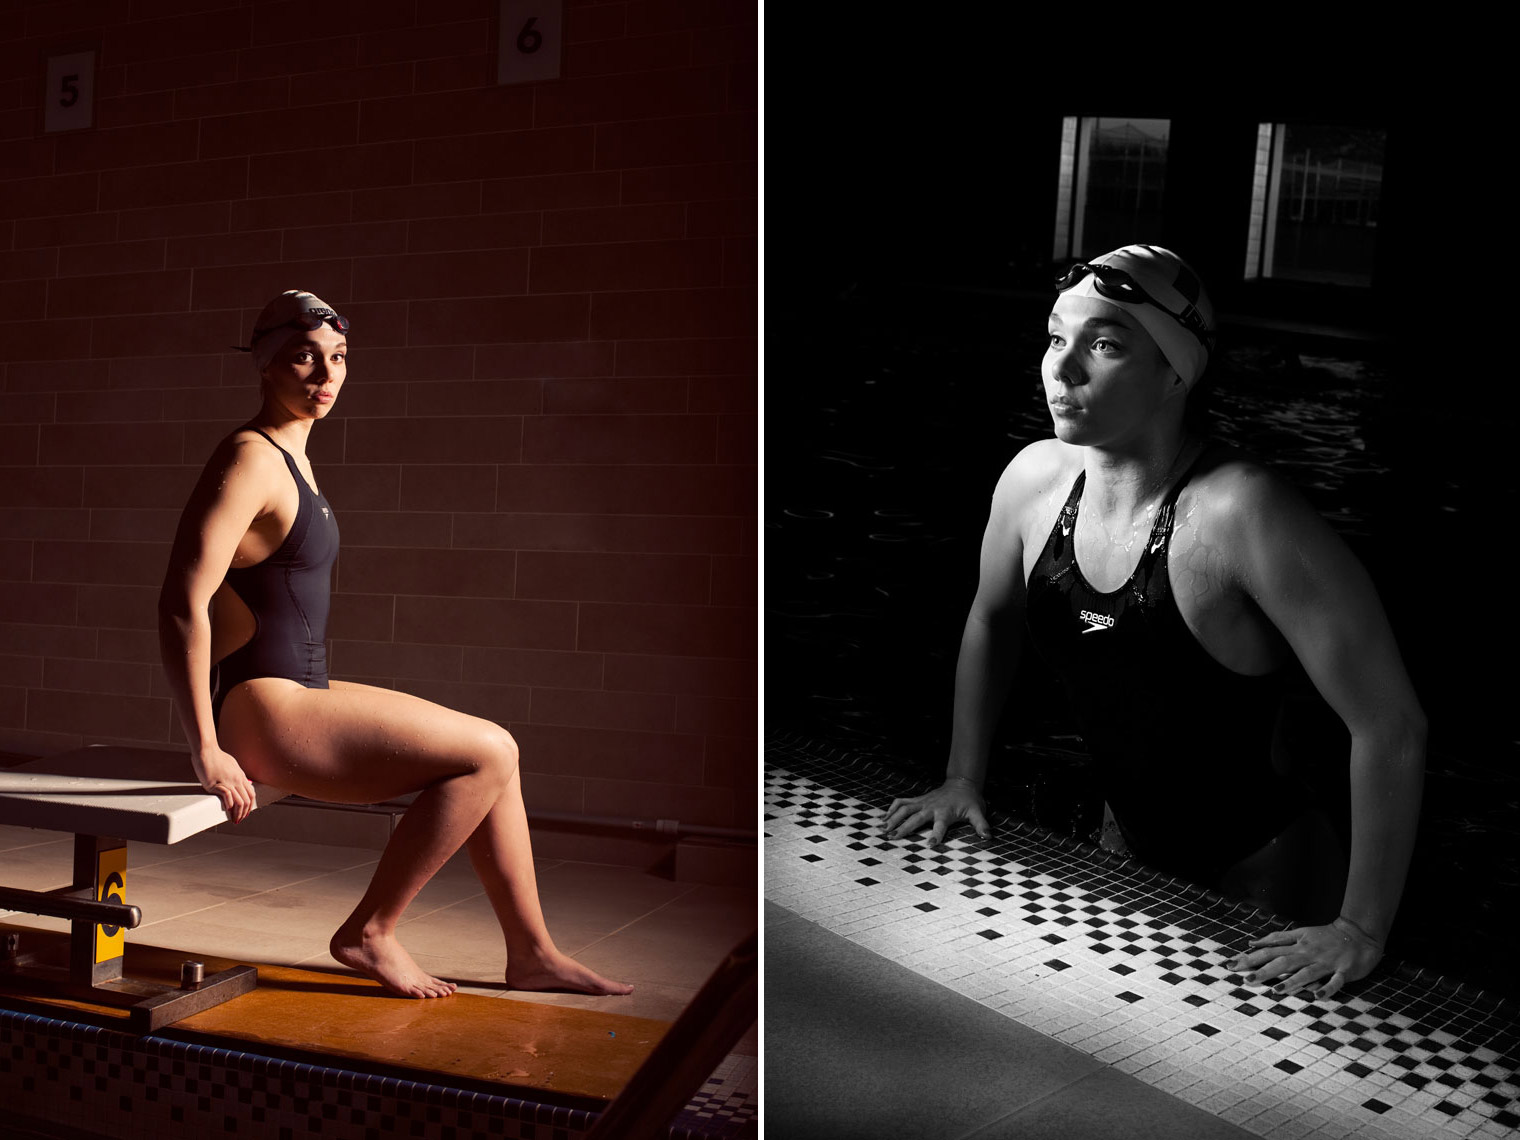 athlete portraits: dramatic imagery of a swimmer